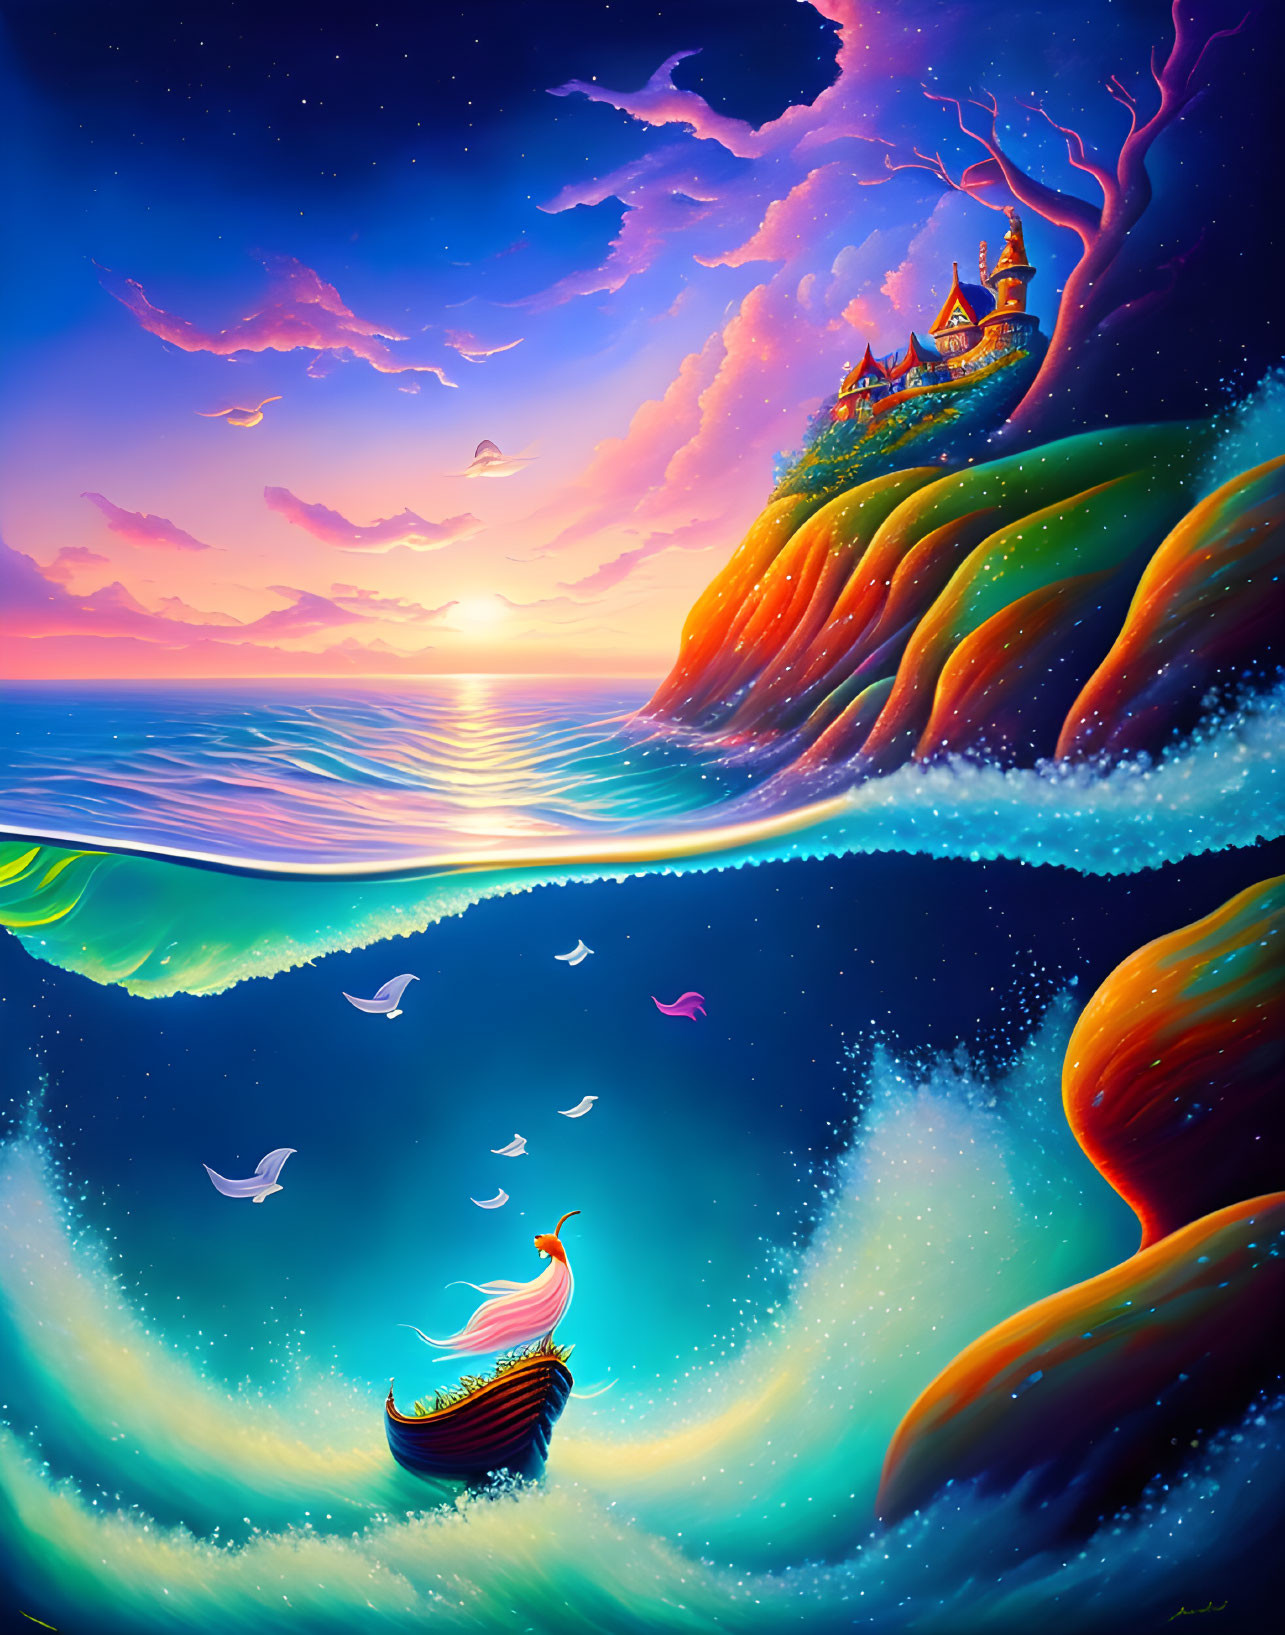 Fantastical sunset seascape with boat, birds, fish, hills, and castle